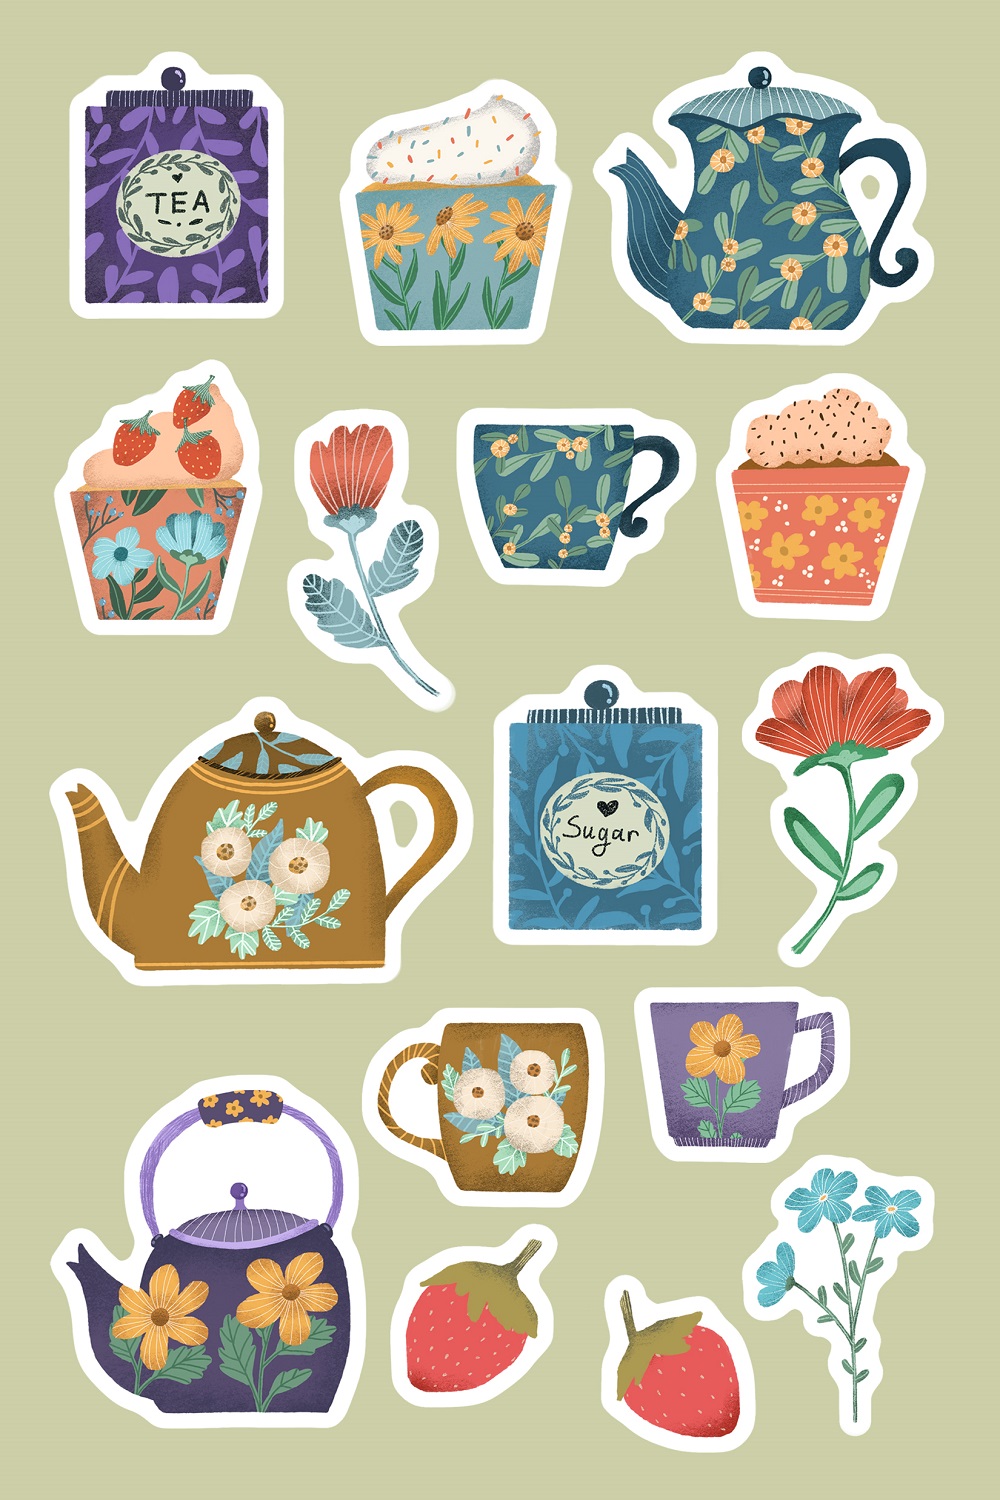 Tea time with cupcake sticker pack pinterest preview image.